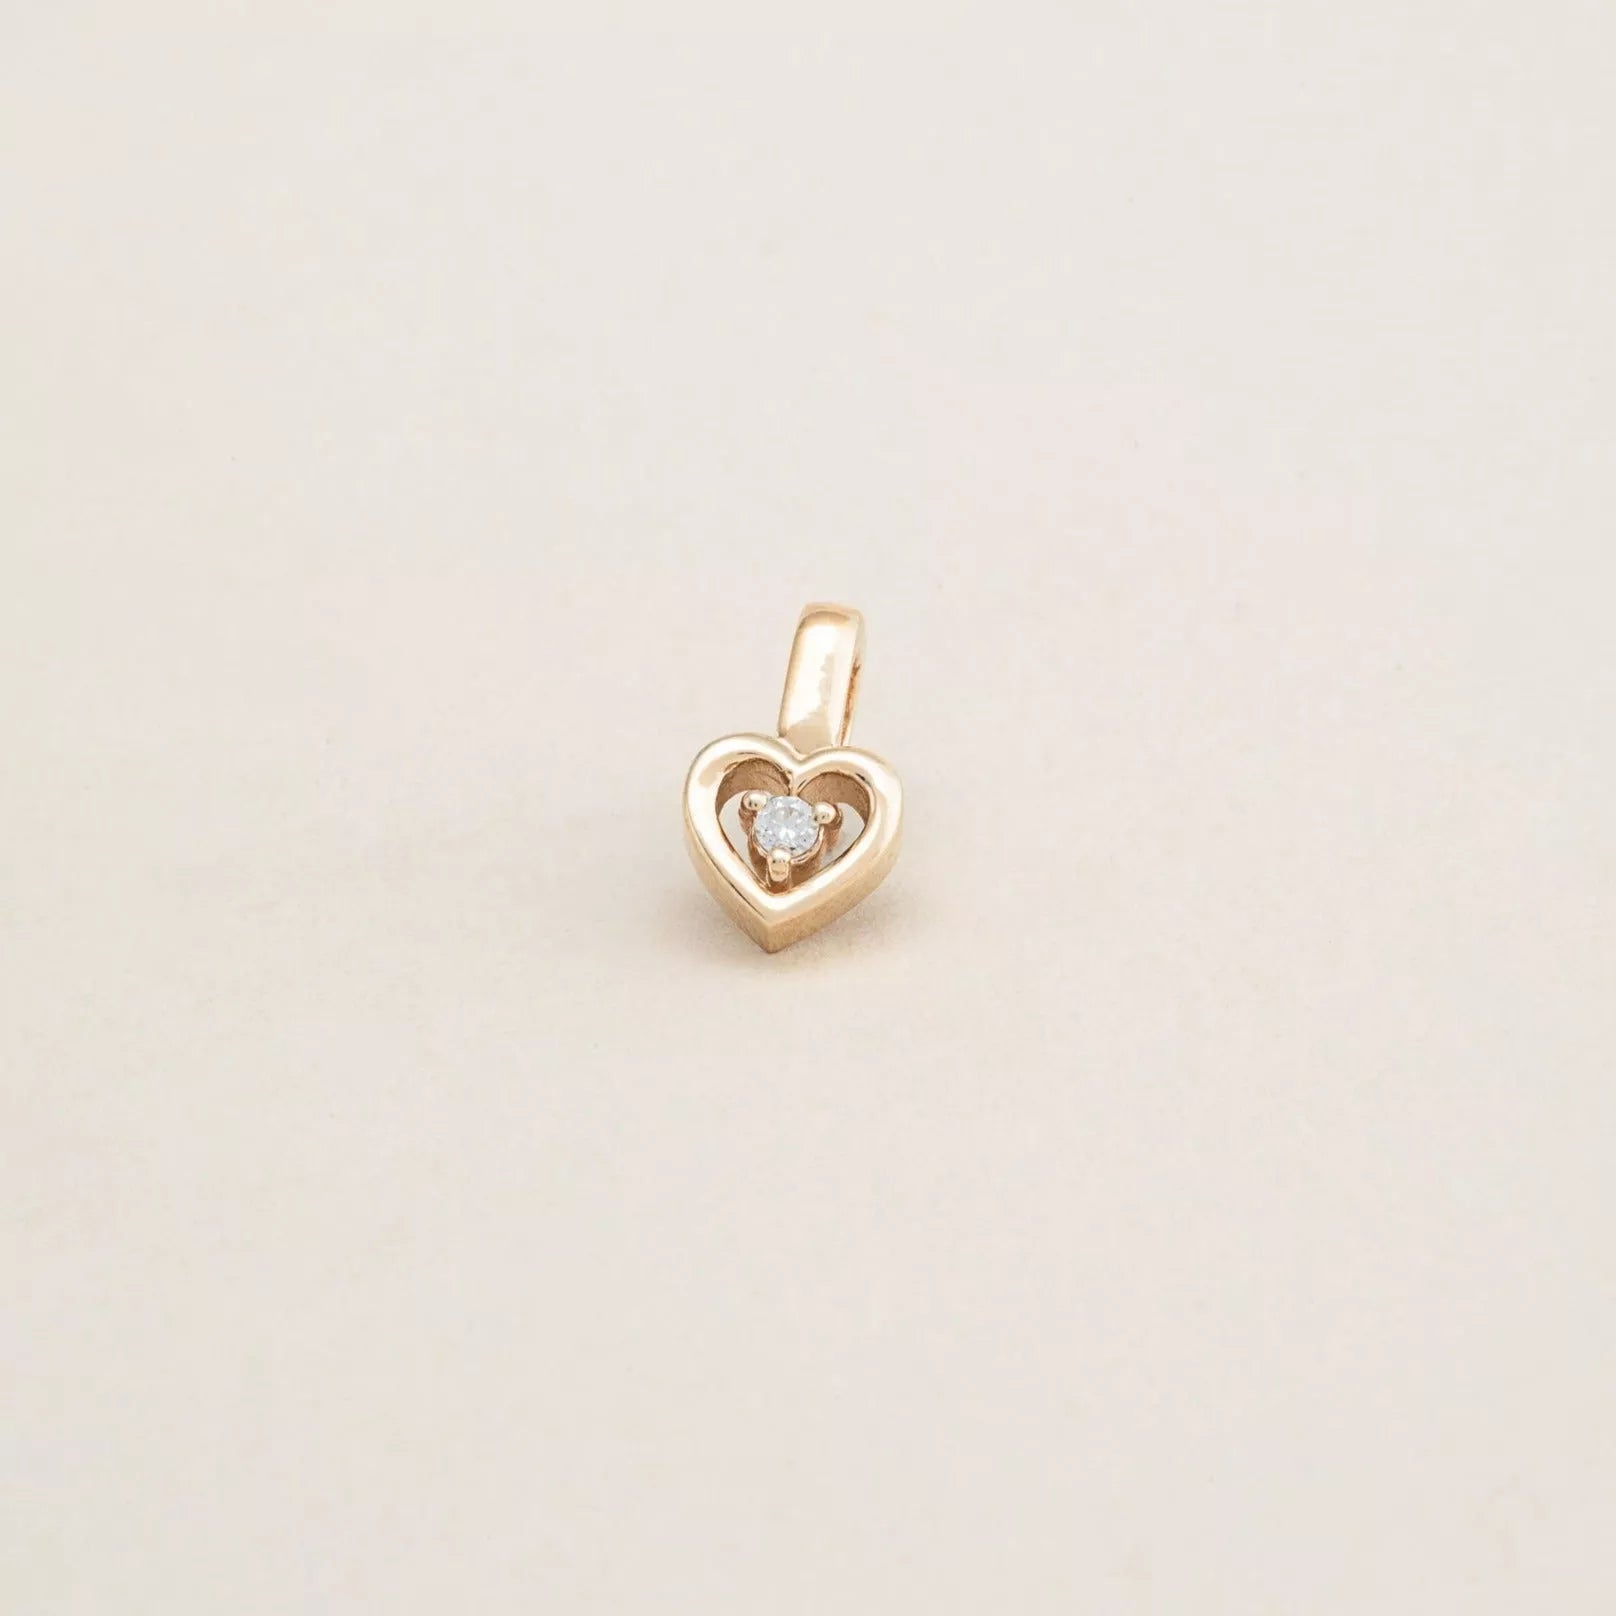 The Hear Charm for Bracelets & Necaklaces.14K solid recycled gold.